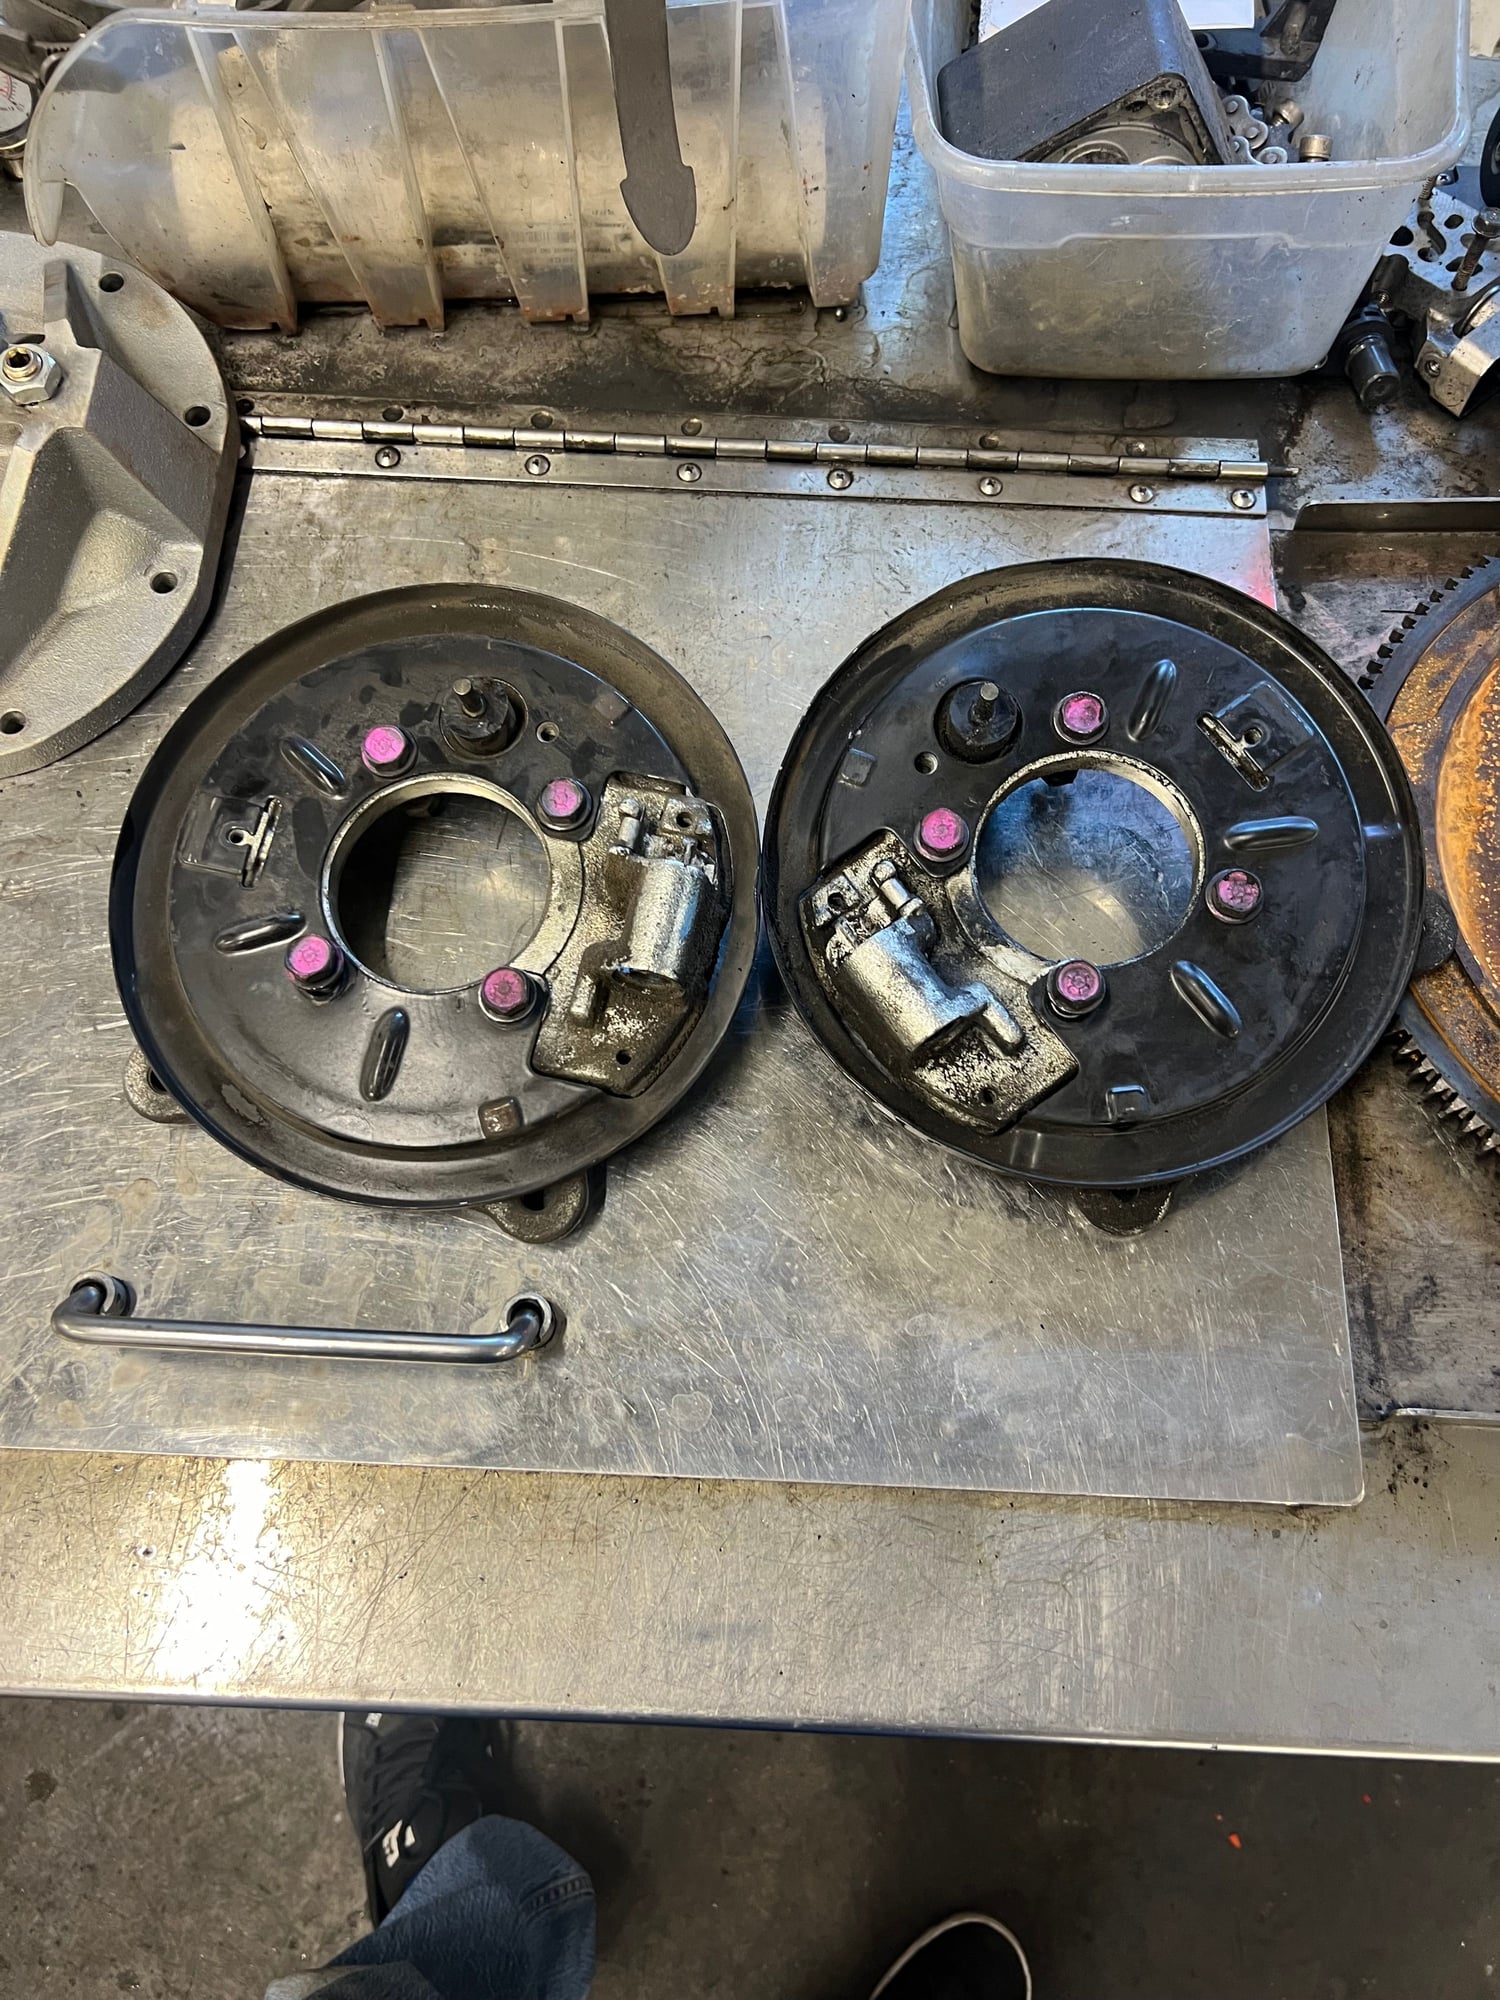 Brakes - 98-02 Ls backing plates - Used - 1998 to 2002  All Models - Greeley, CO 80635, United States